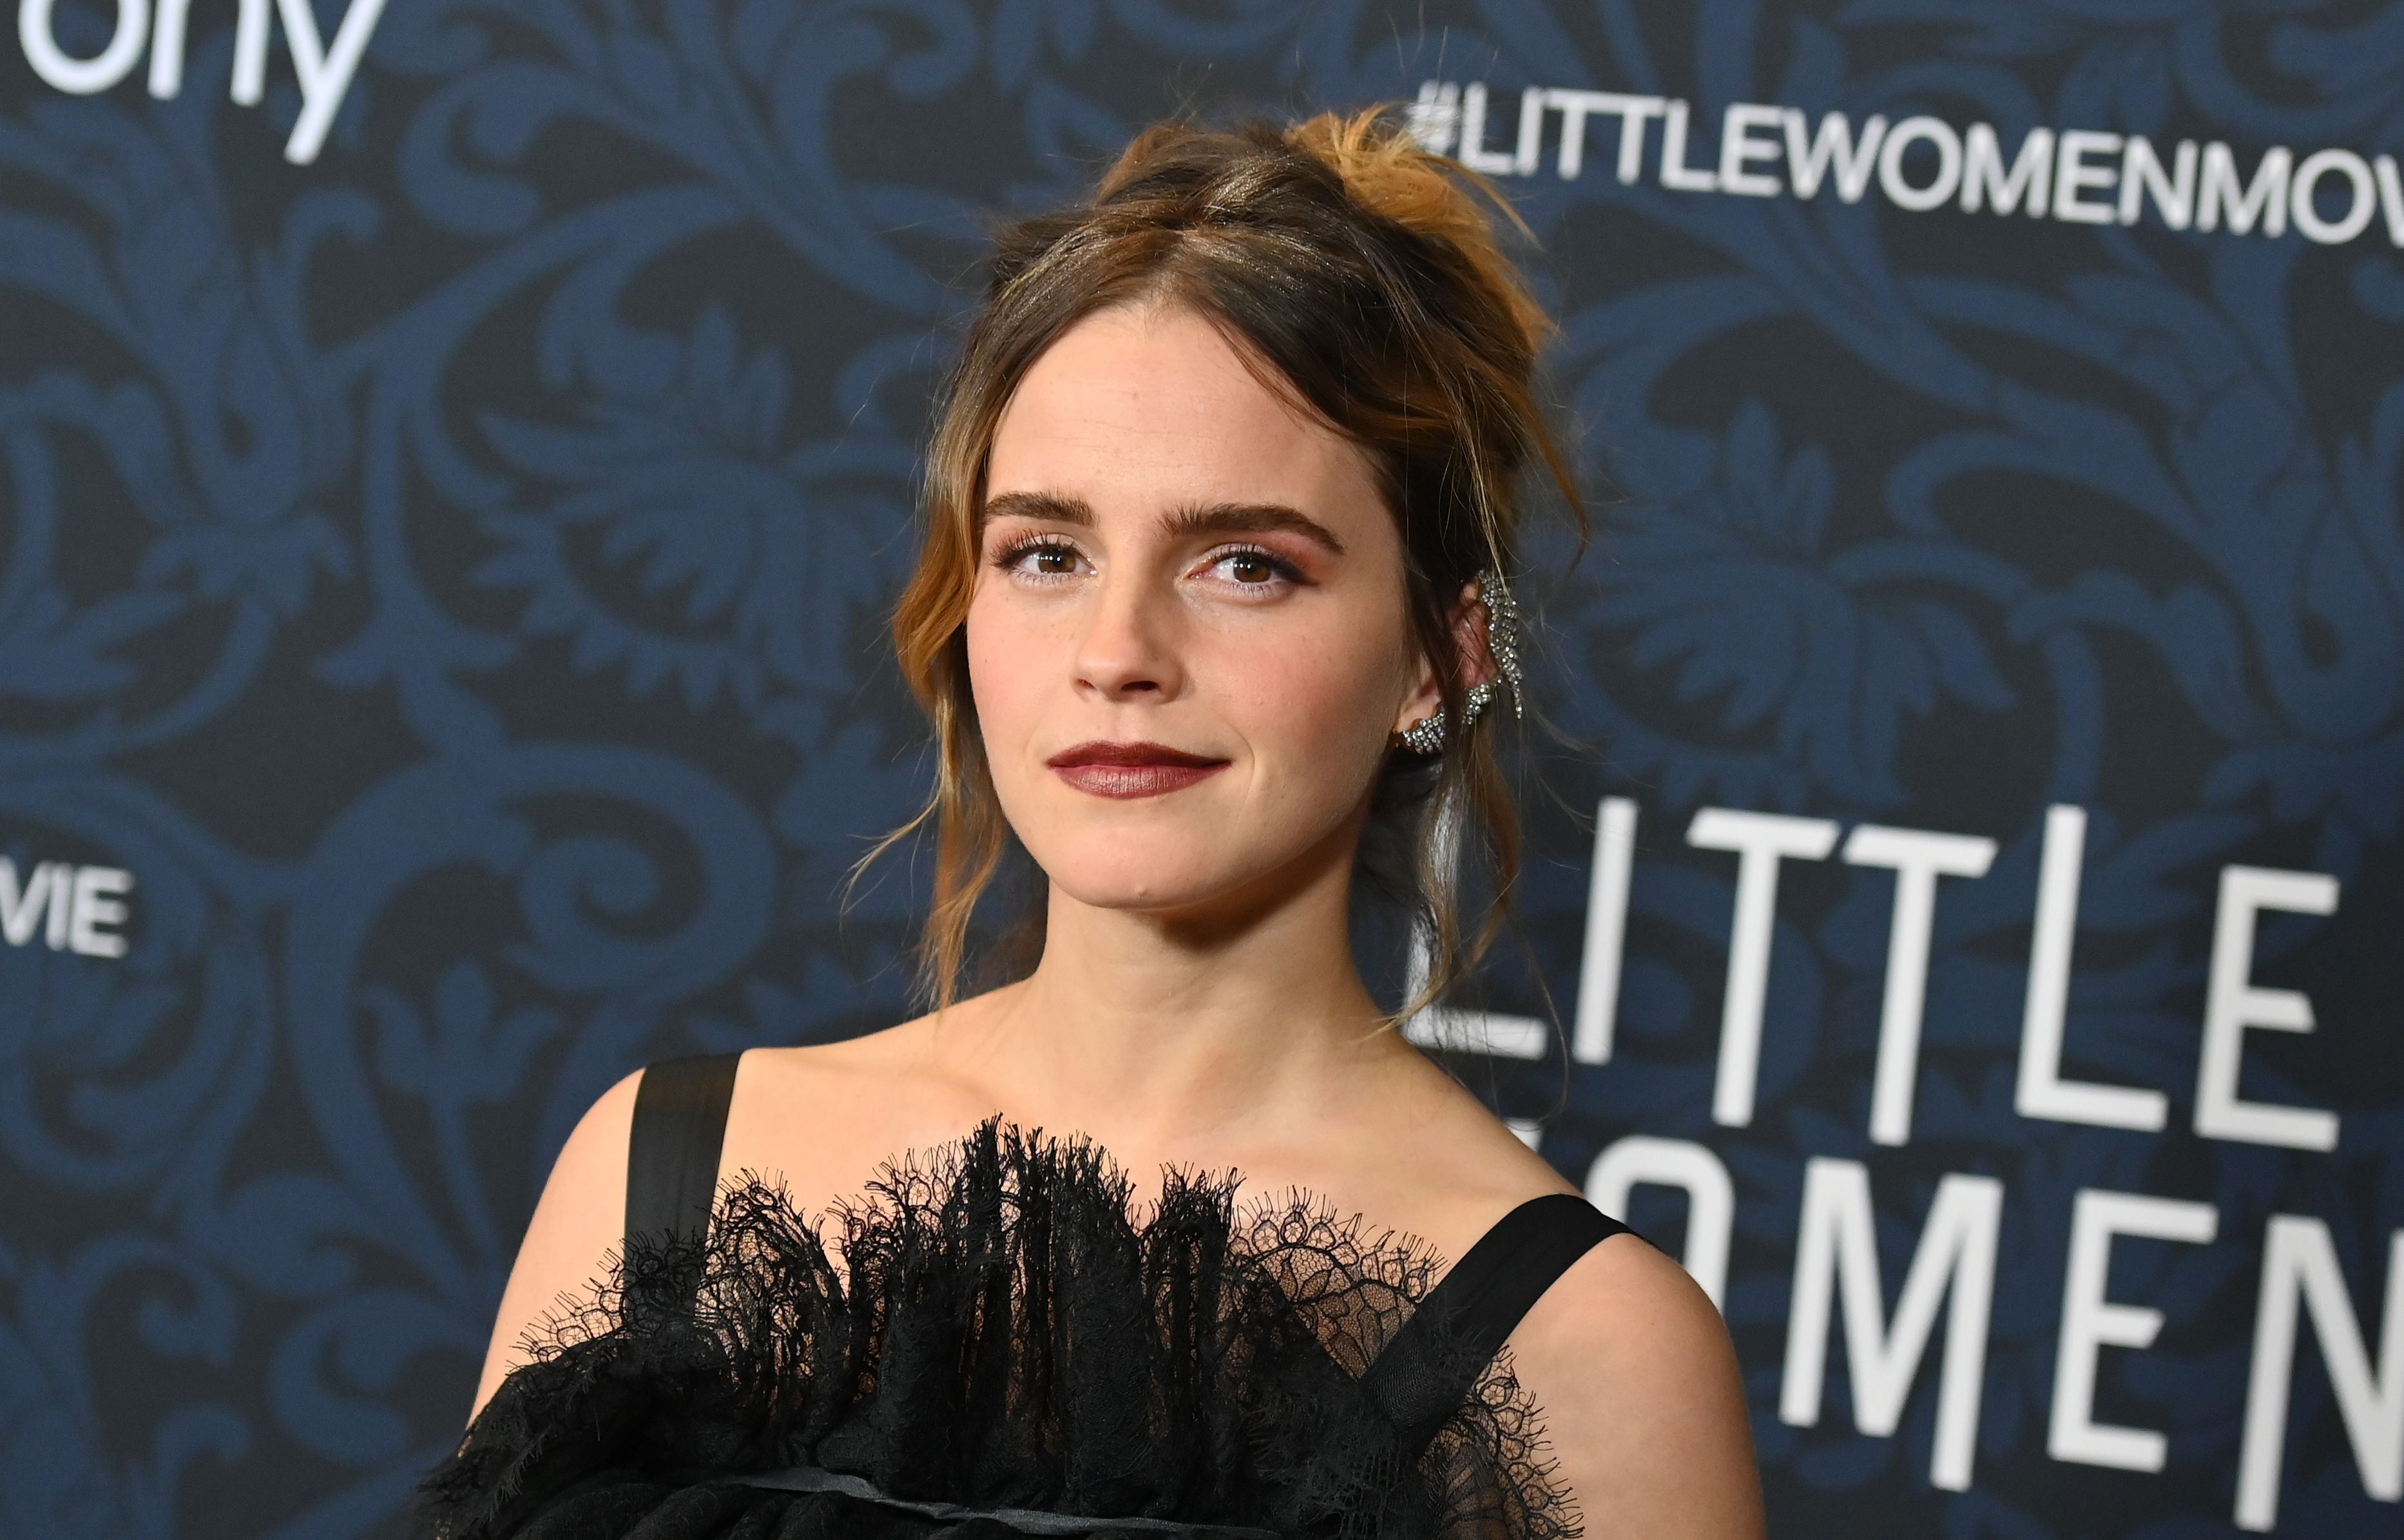 Emma Watson Helps Reduce the Fashion Carbon Footprint With New Partnership